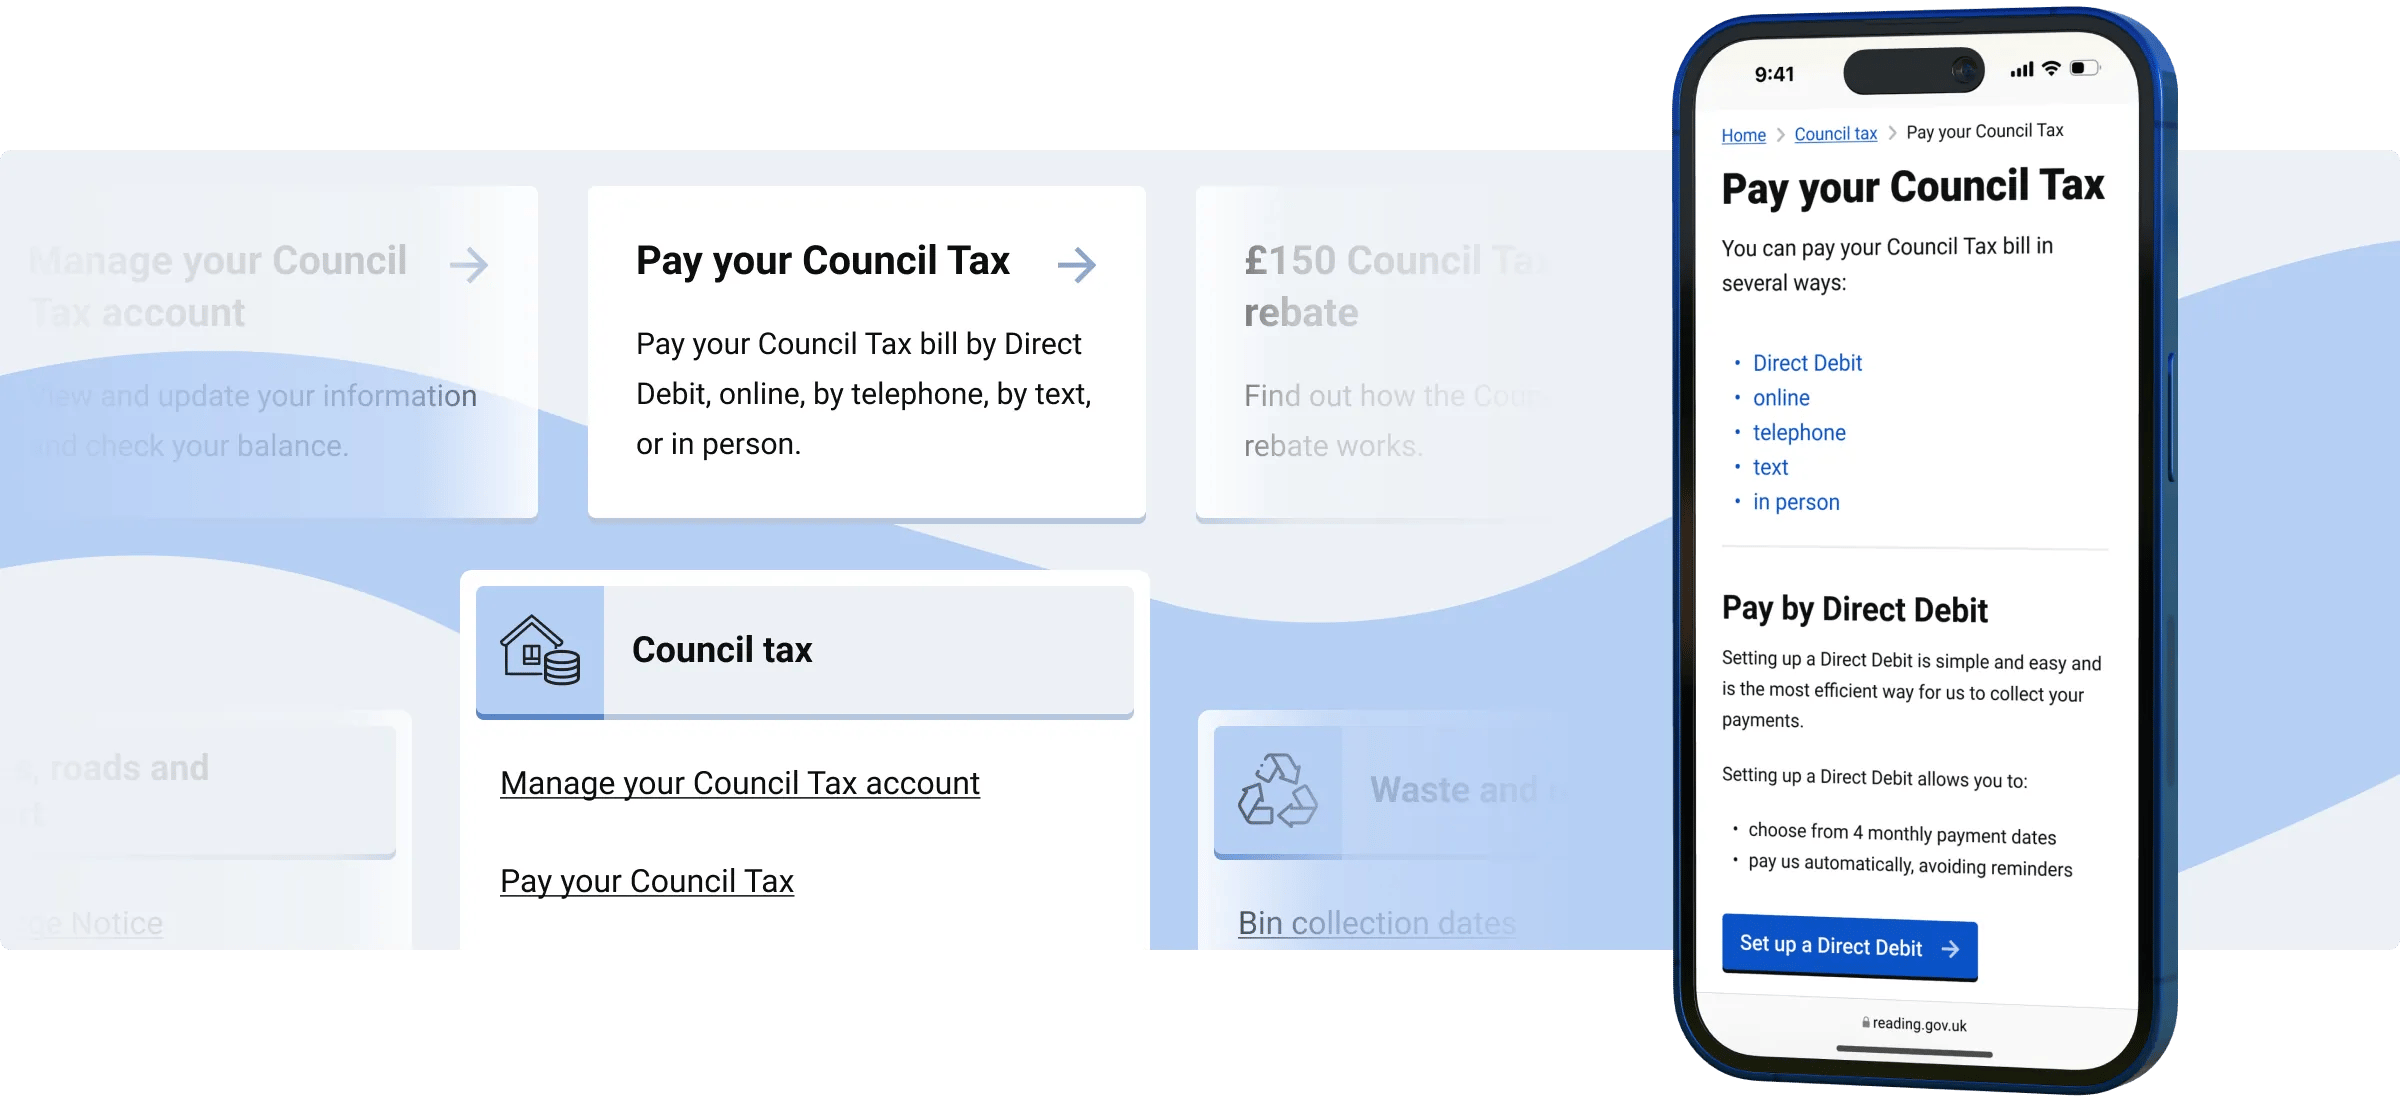 Mockup of the Council Tax landing page on mobile